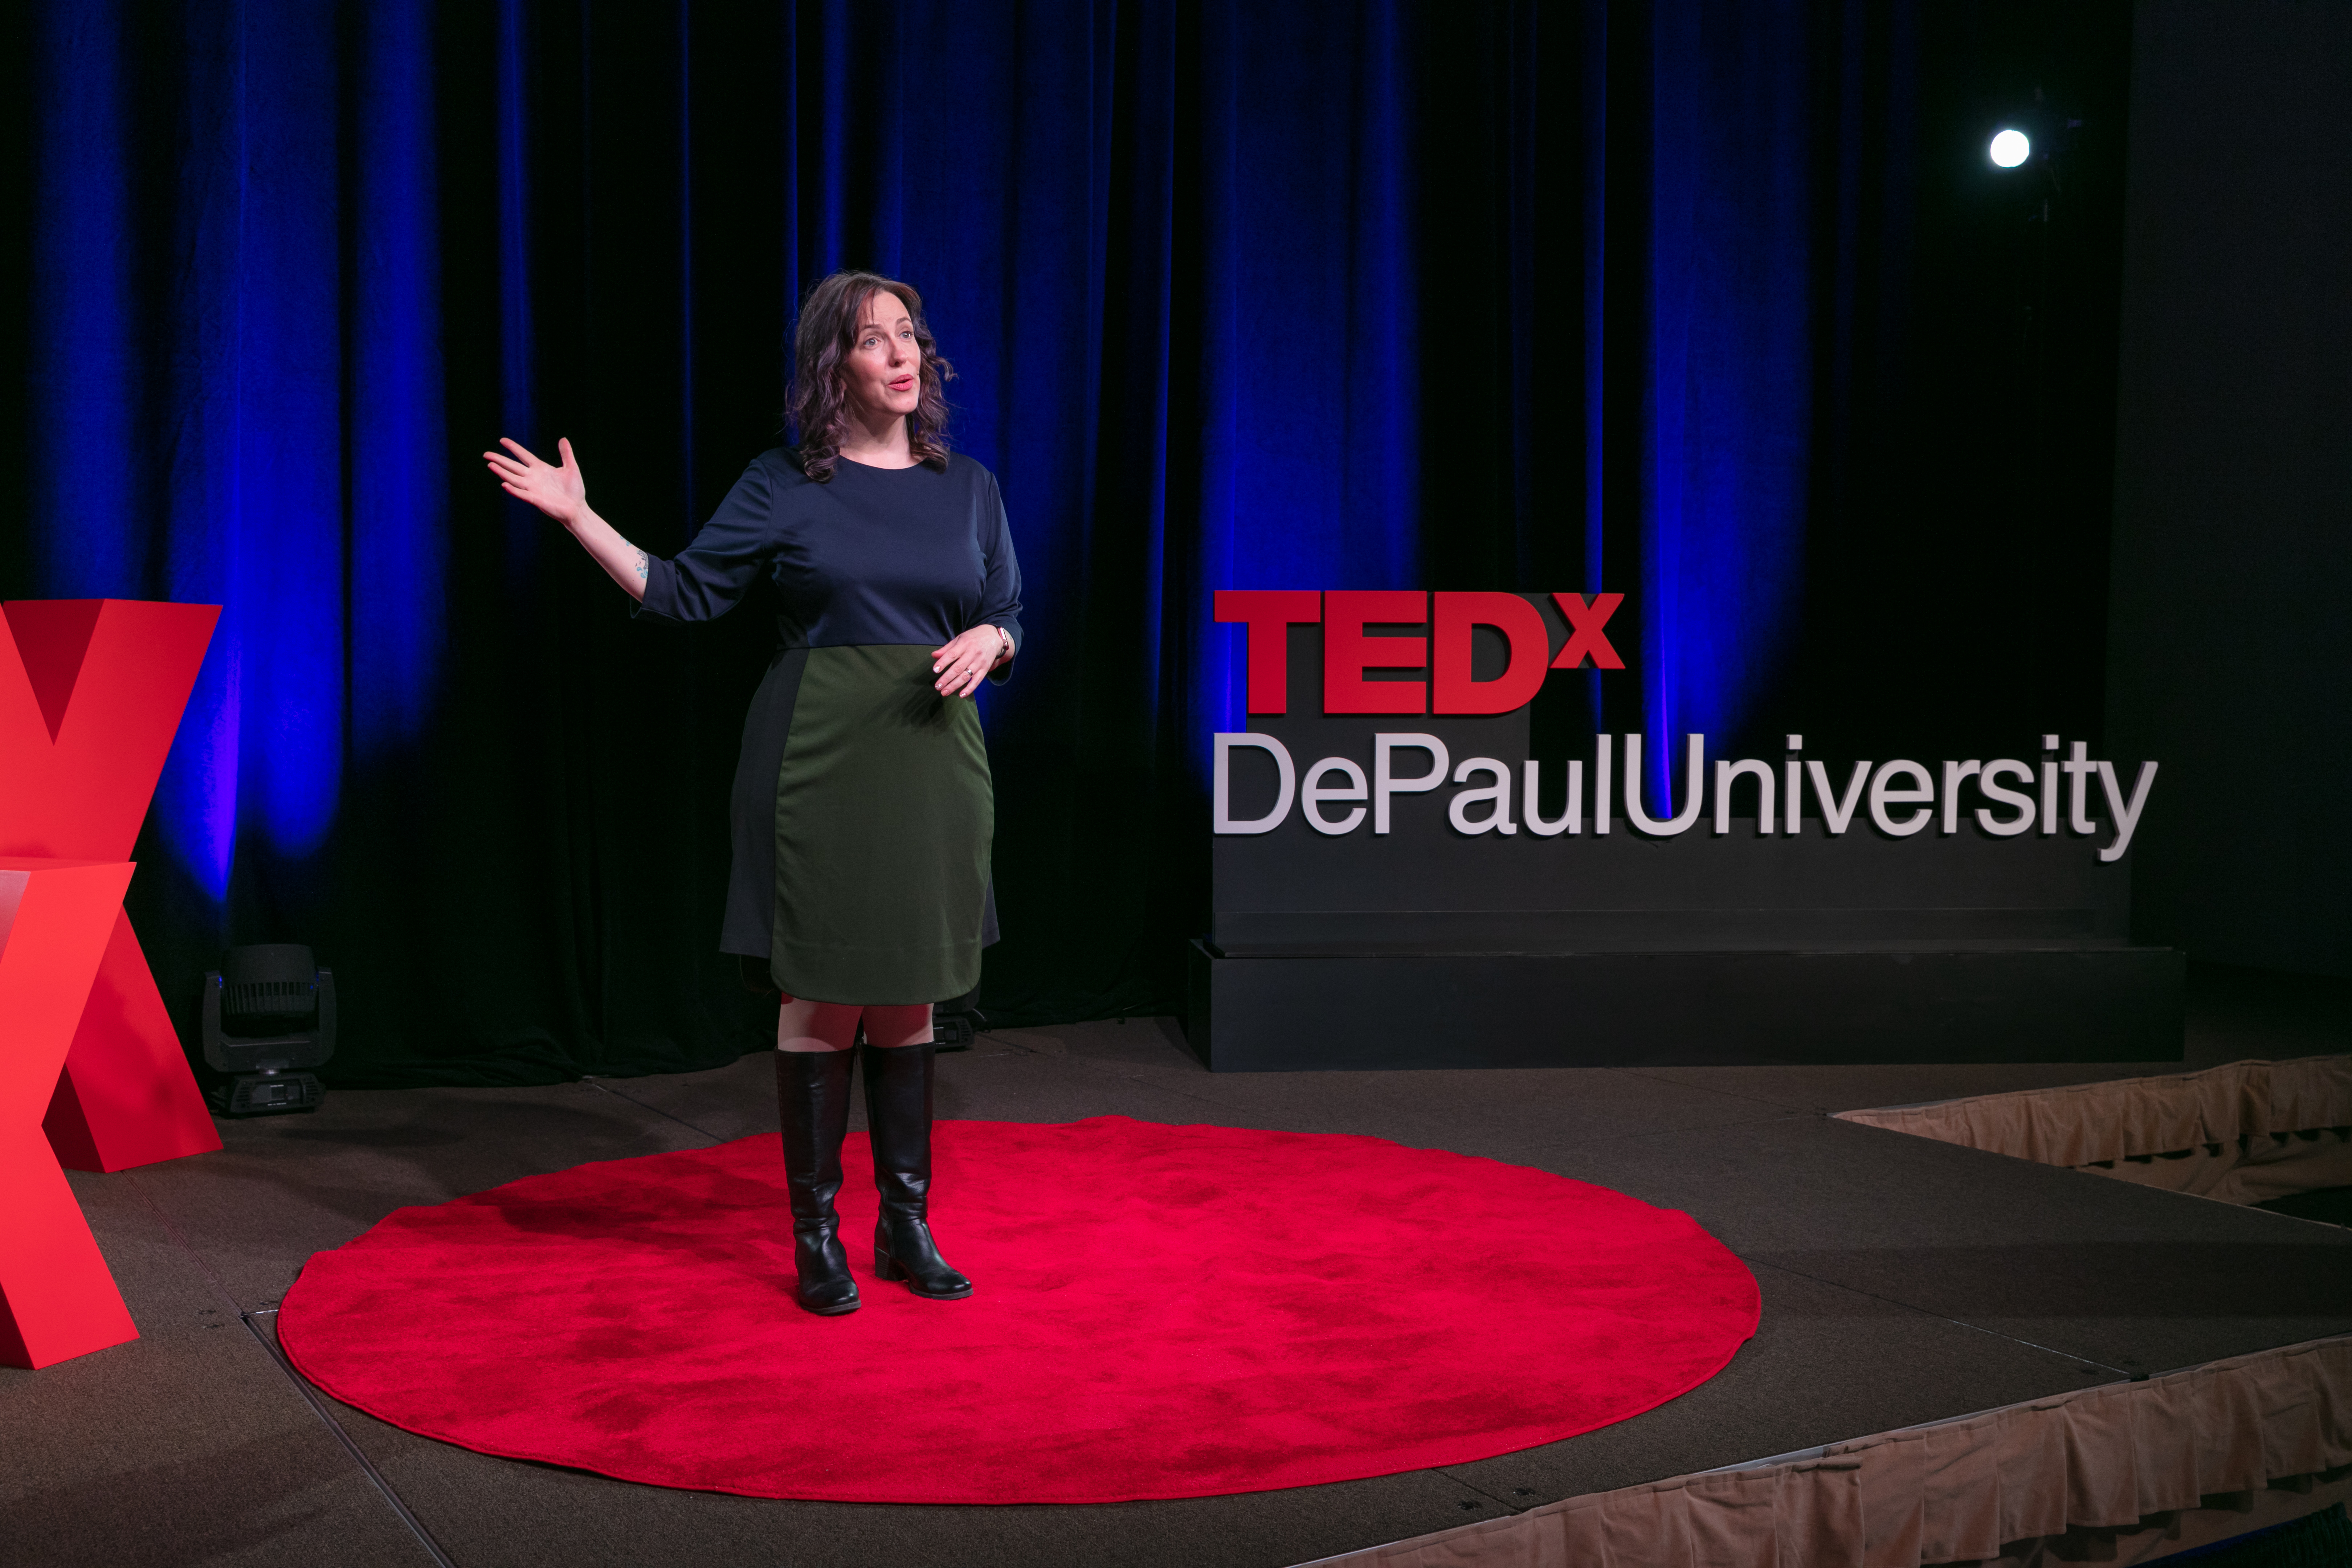 Coya Paz stands on stage giving her TEDxDePaulUniversity Talk